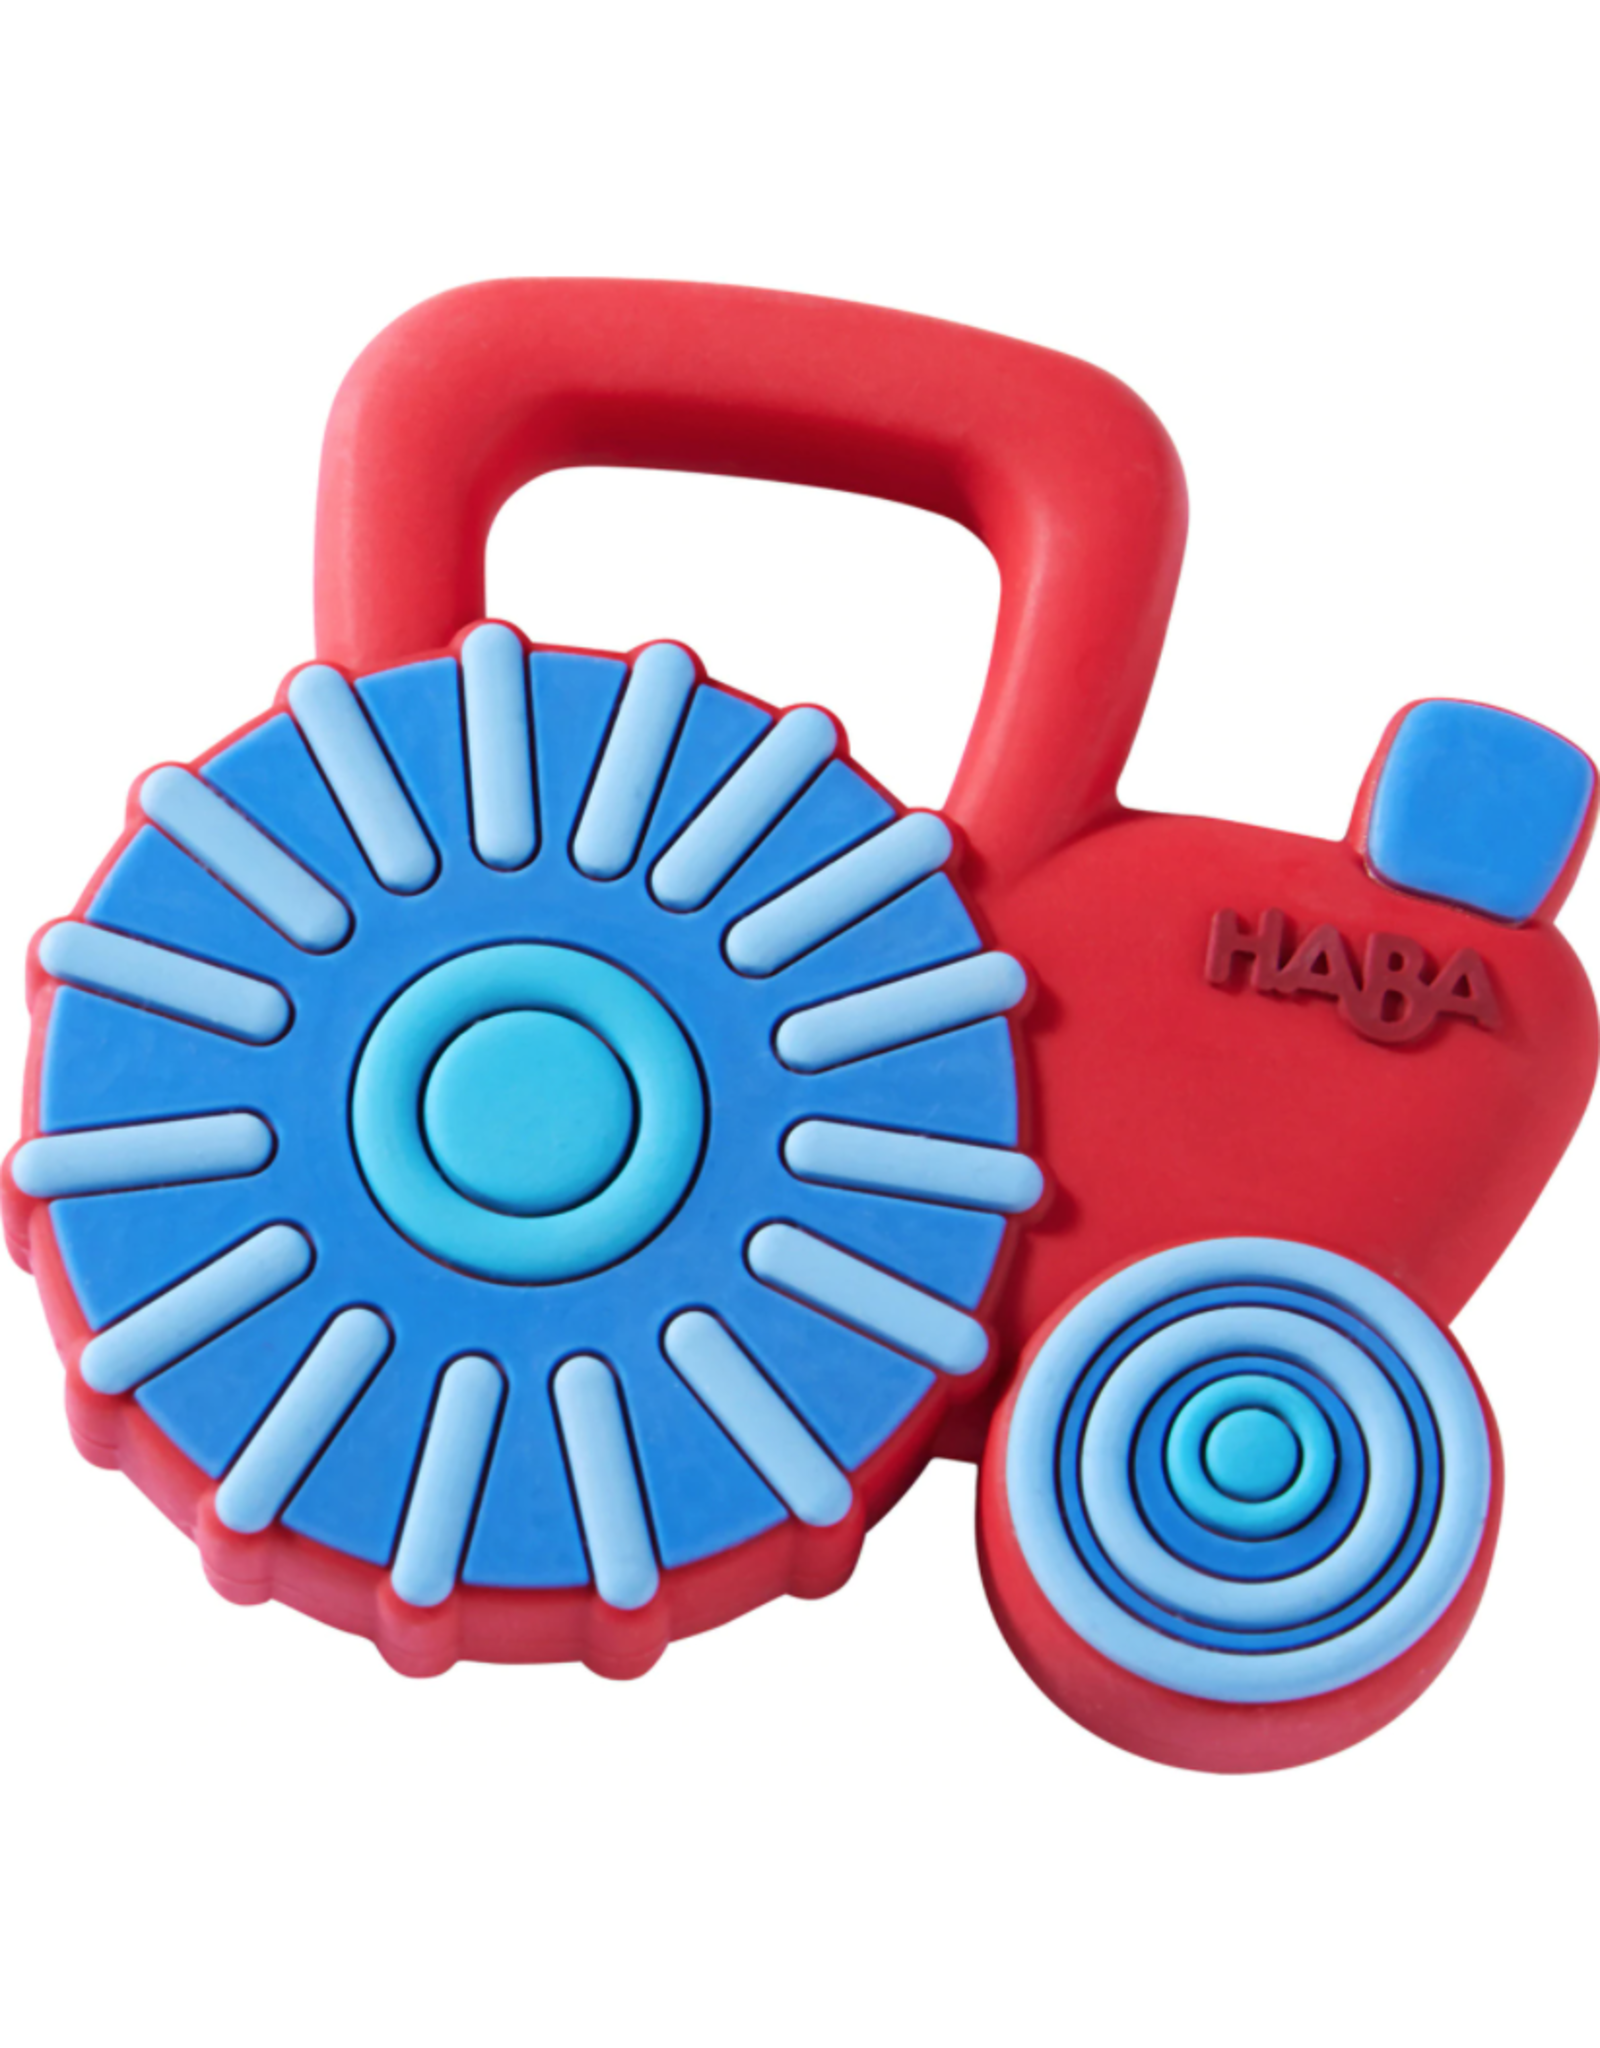 Haba Clutching Toy Tractor